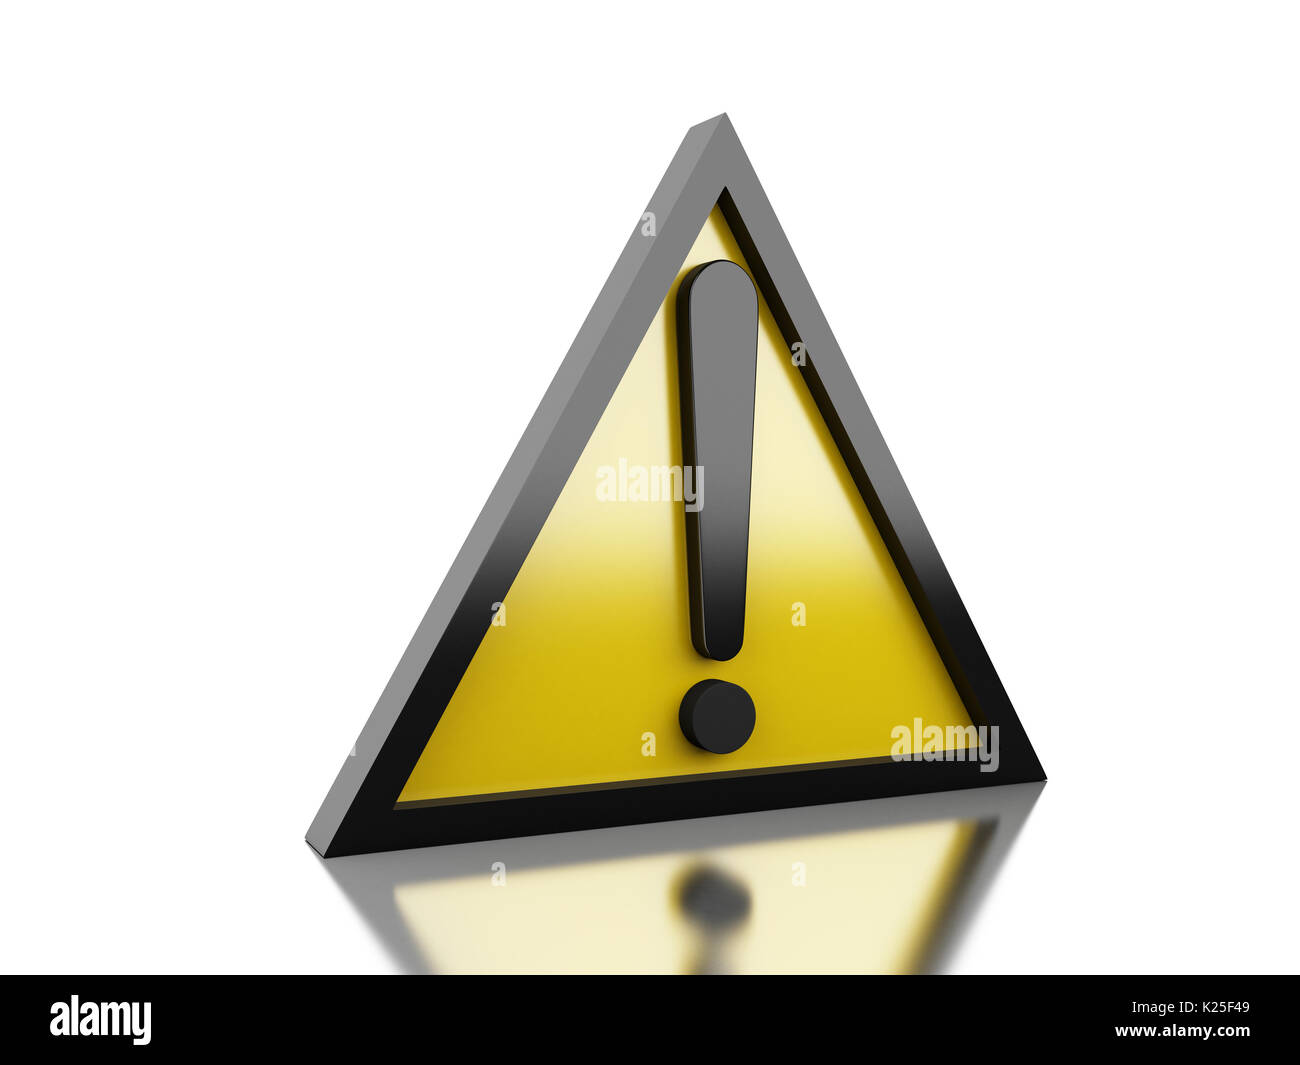 3d illustration. Warning road sign with exclamation mark. Isolated ...